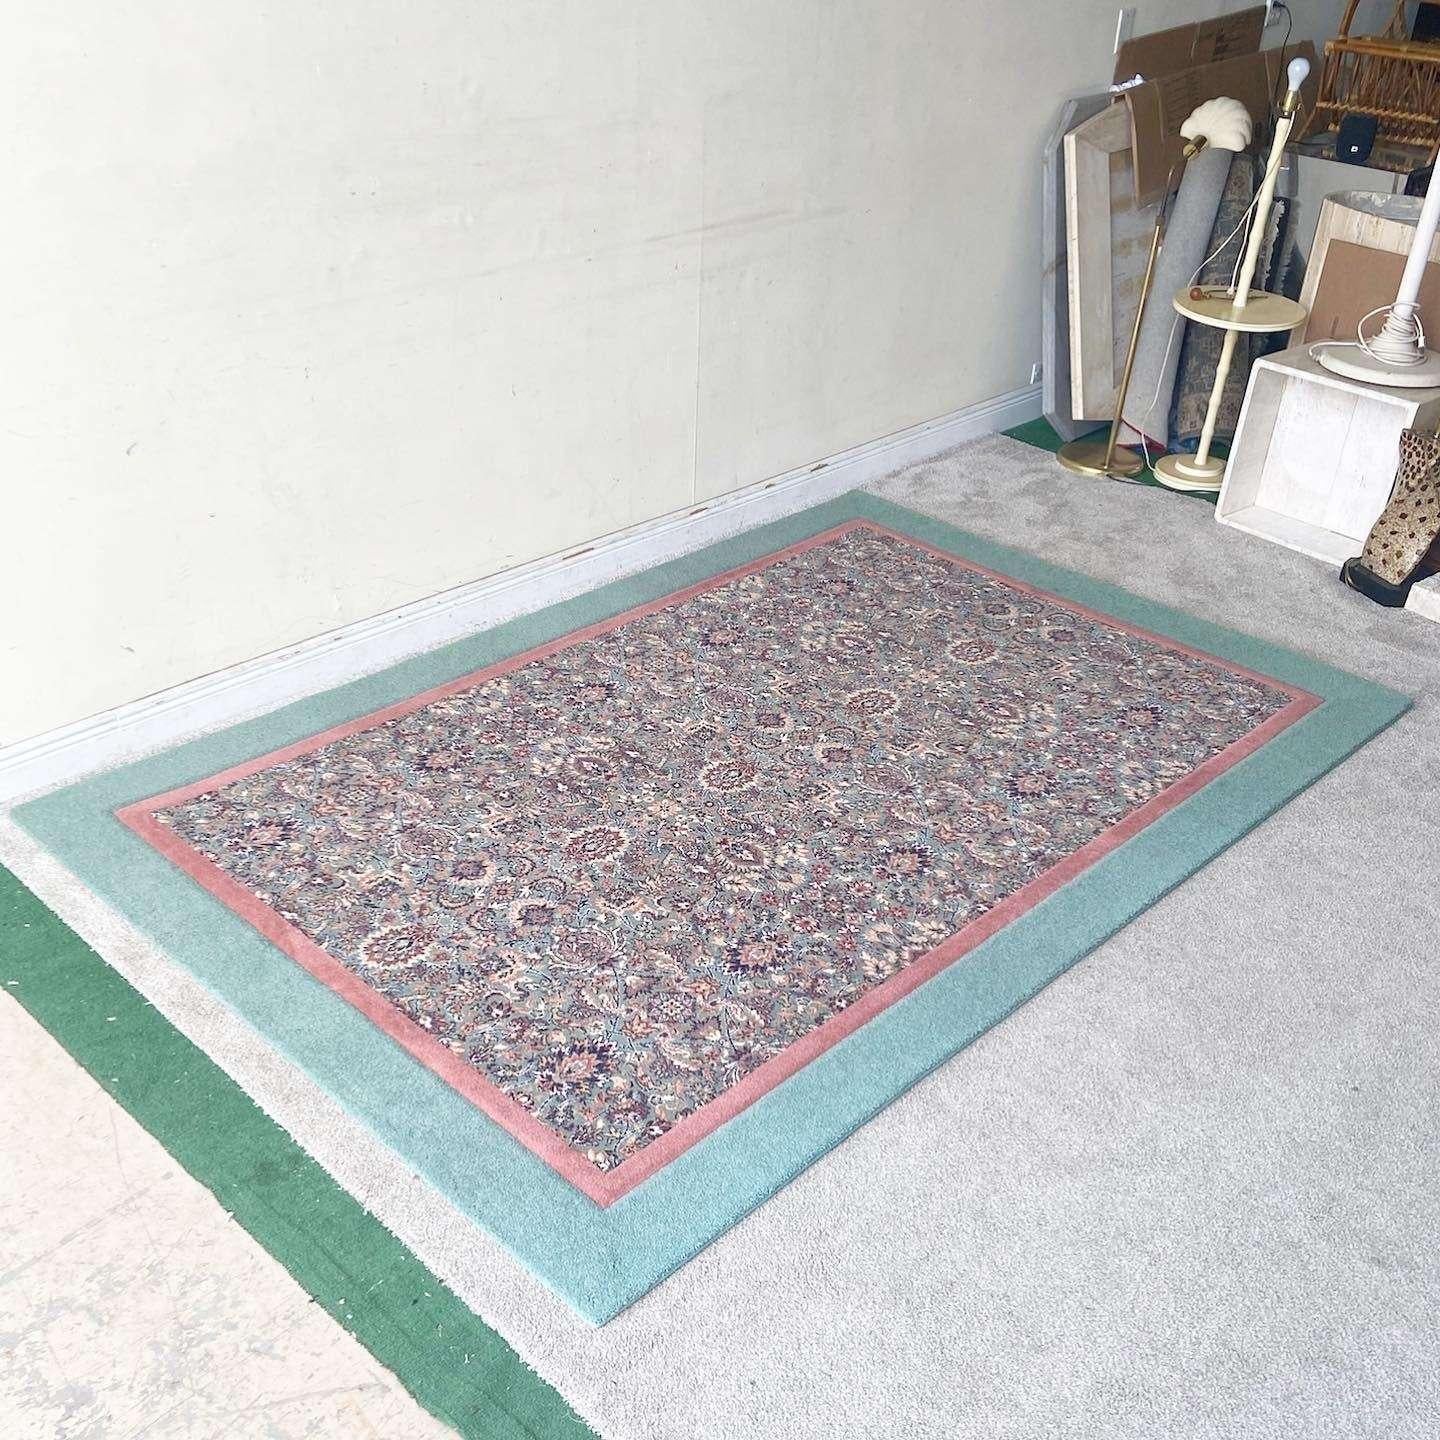 Fantastic vintage postmodern rectangular area rug. Features a traditional eastern design within a pink and teal edge.,

Rug 33
